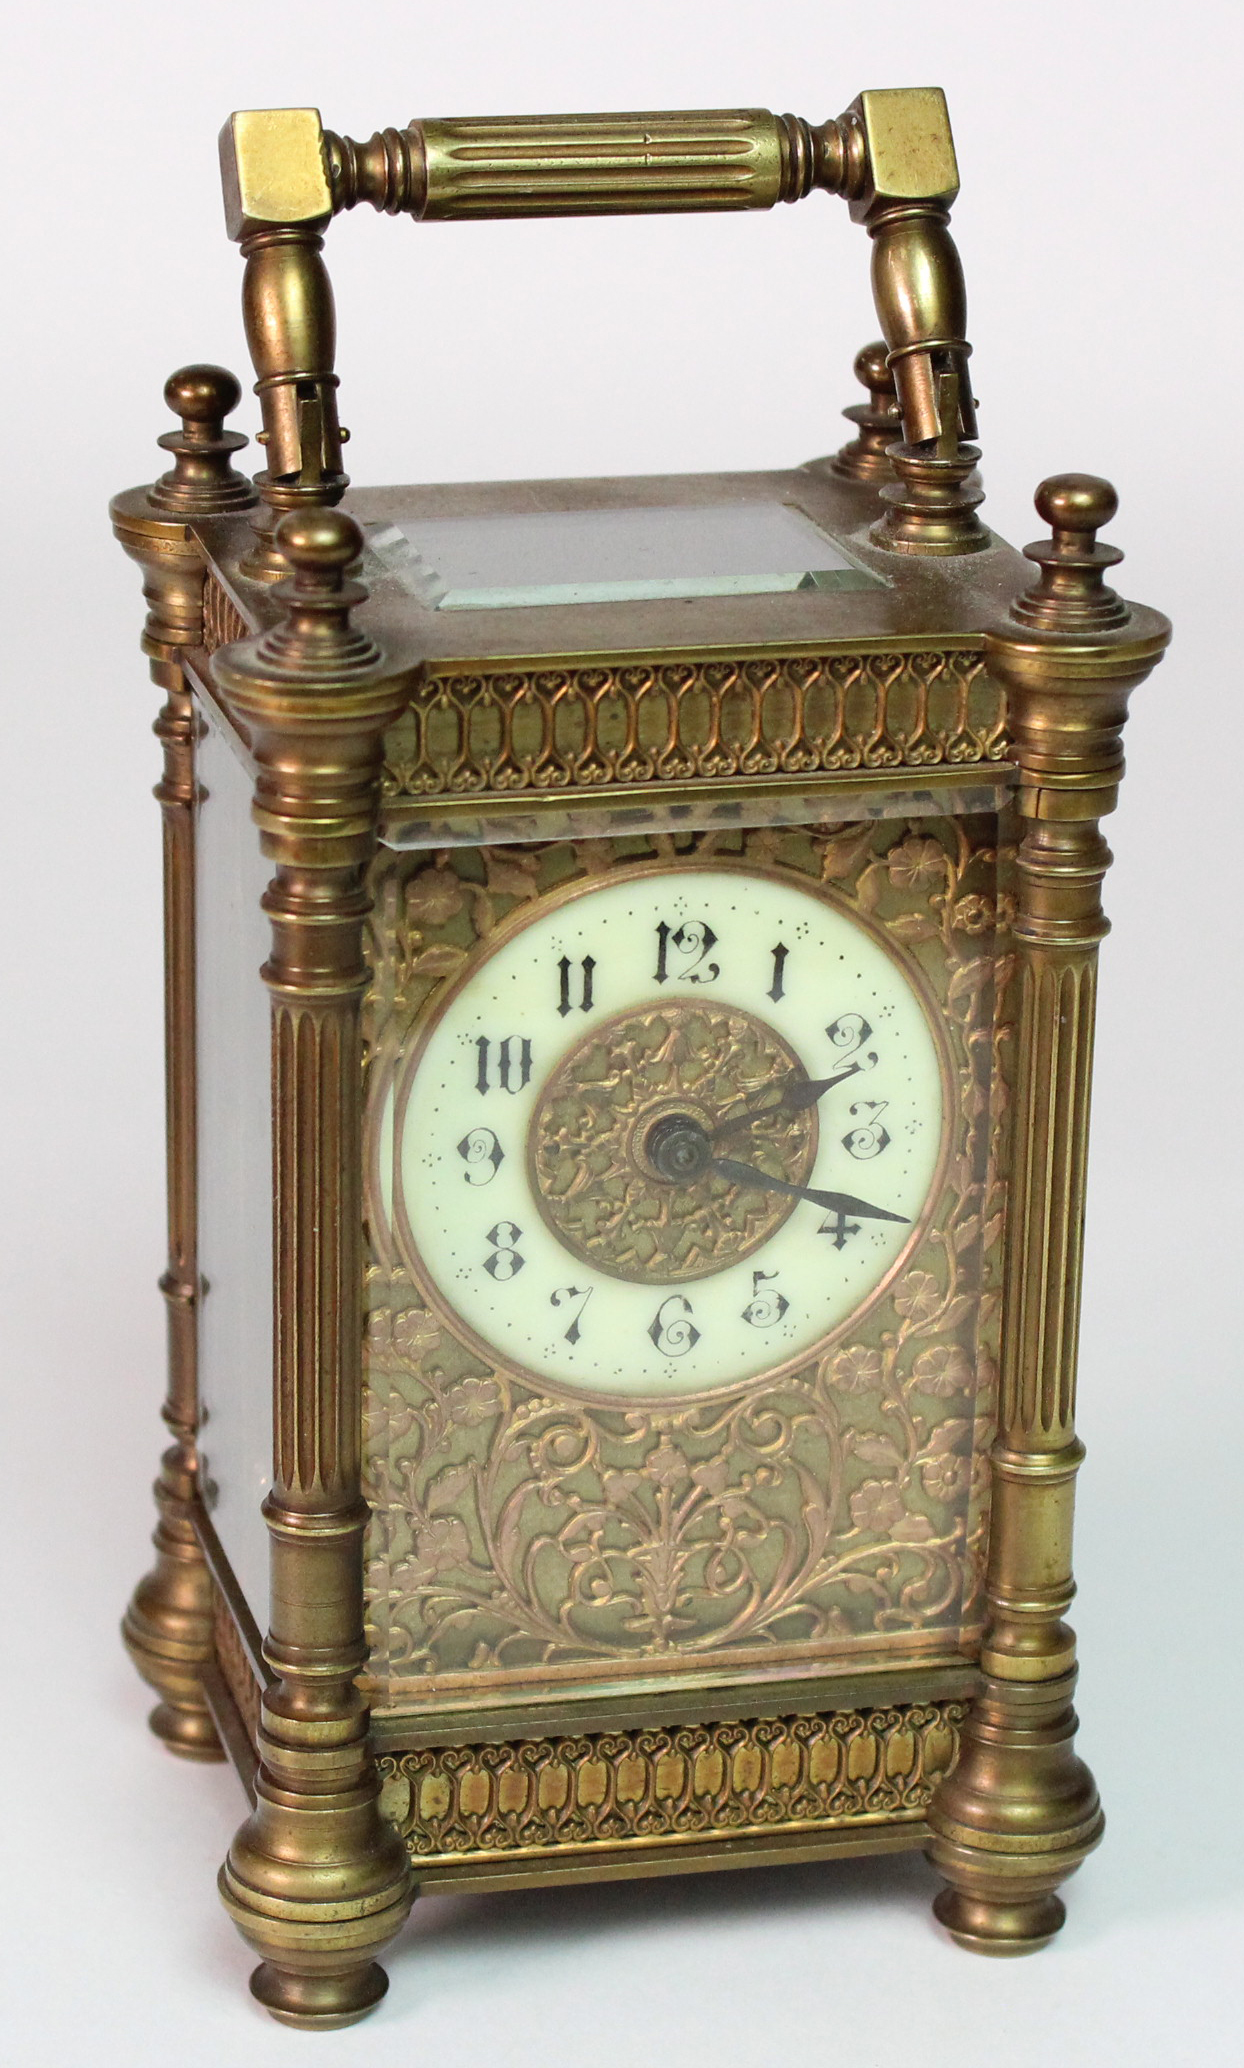 Brass five glass carriage clock, enamel dial with Arabic numerals, surrounded by foliage filigree